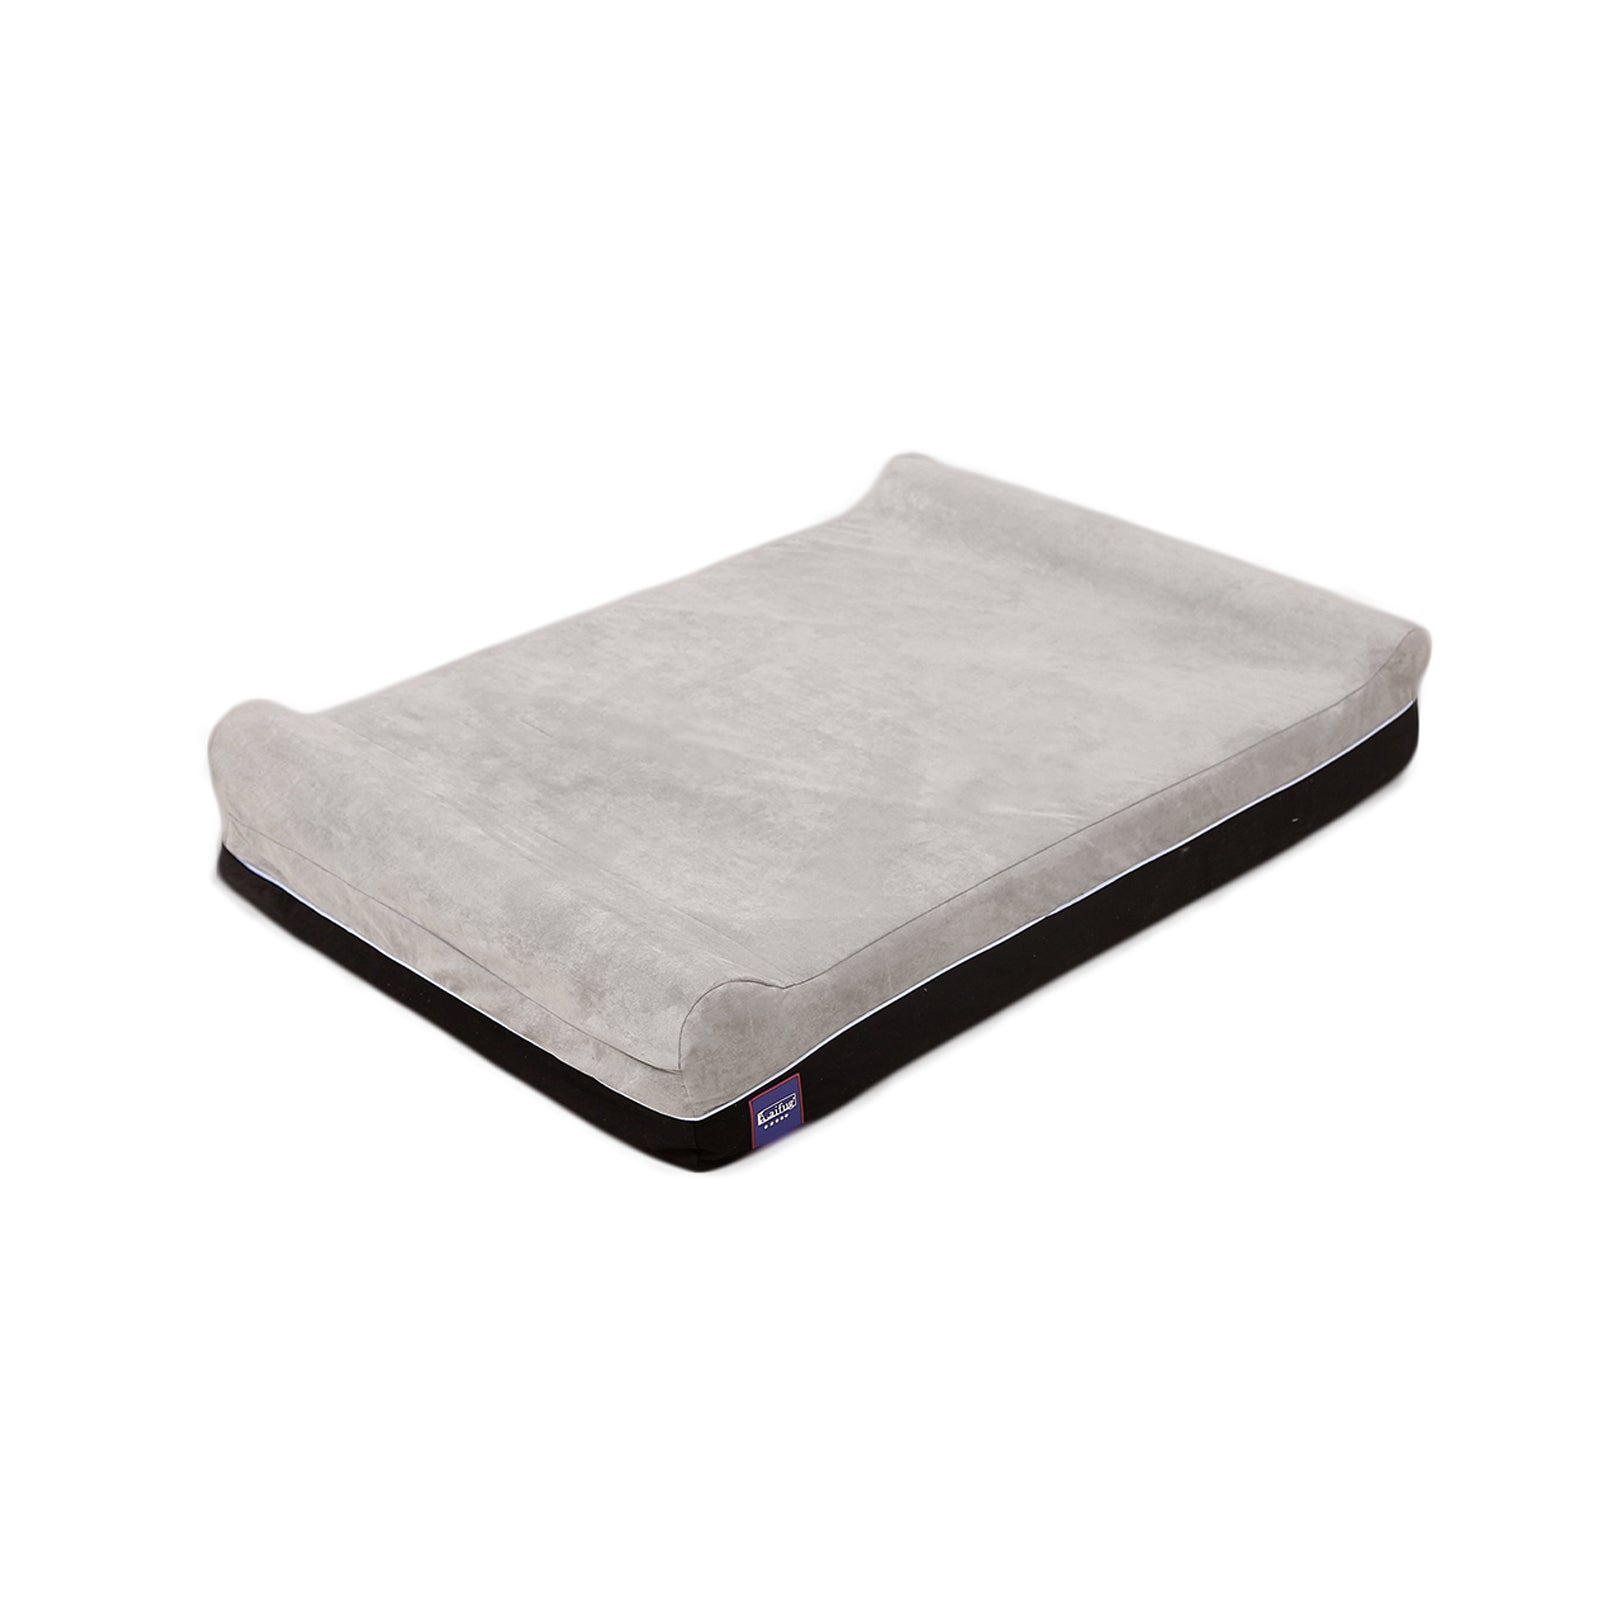 4 Solid Memory Foam Bed with Waterproof Cover (Available in 25